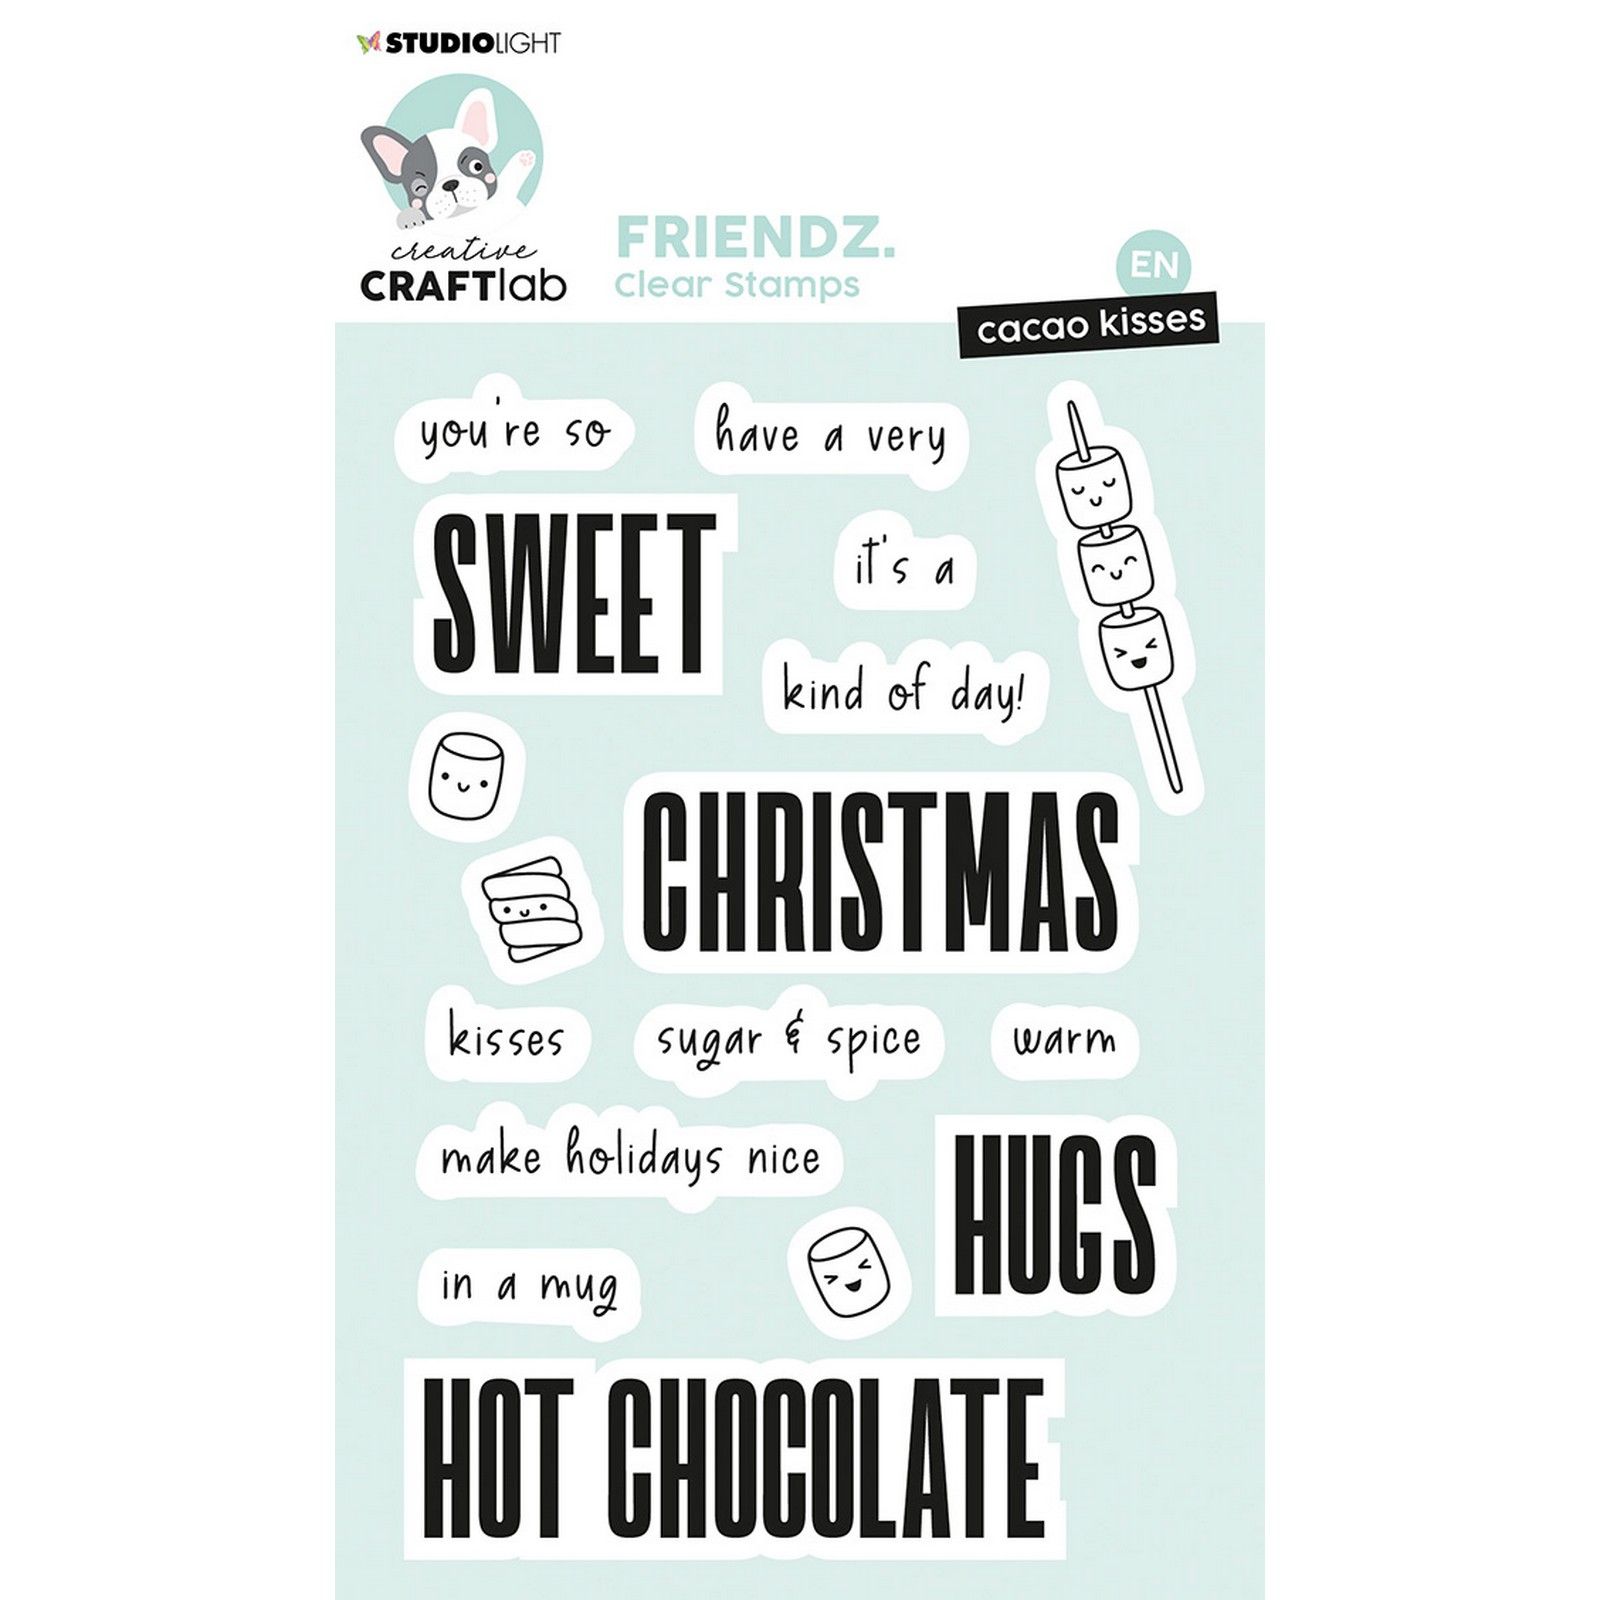 Creative Craftlab • Friendz Clear Stamp Cacao Kisses